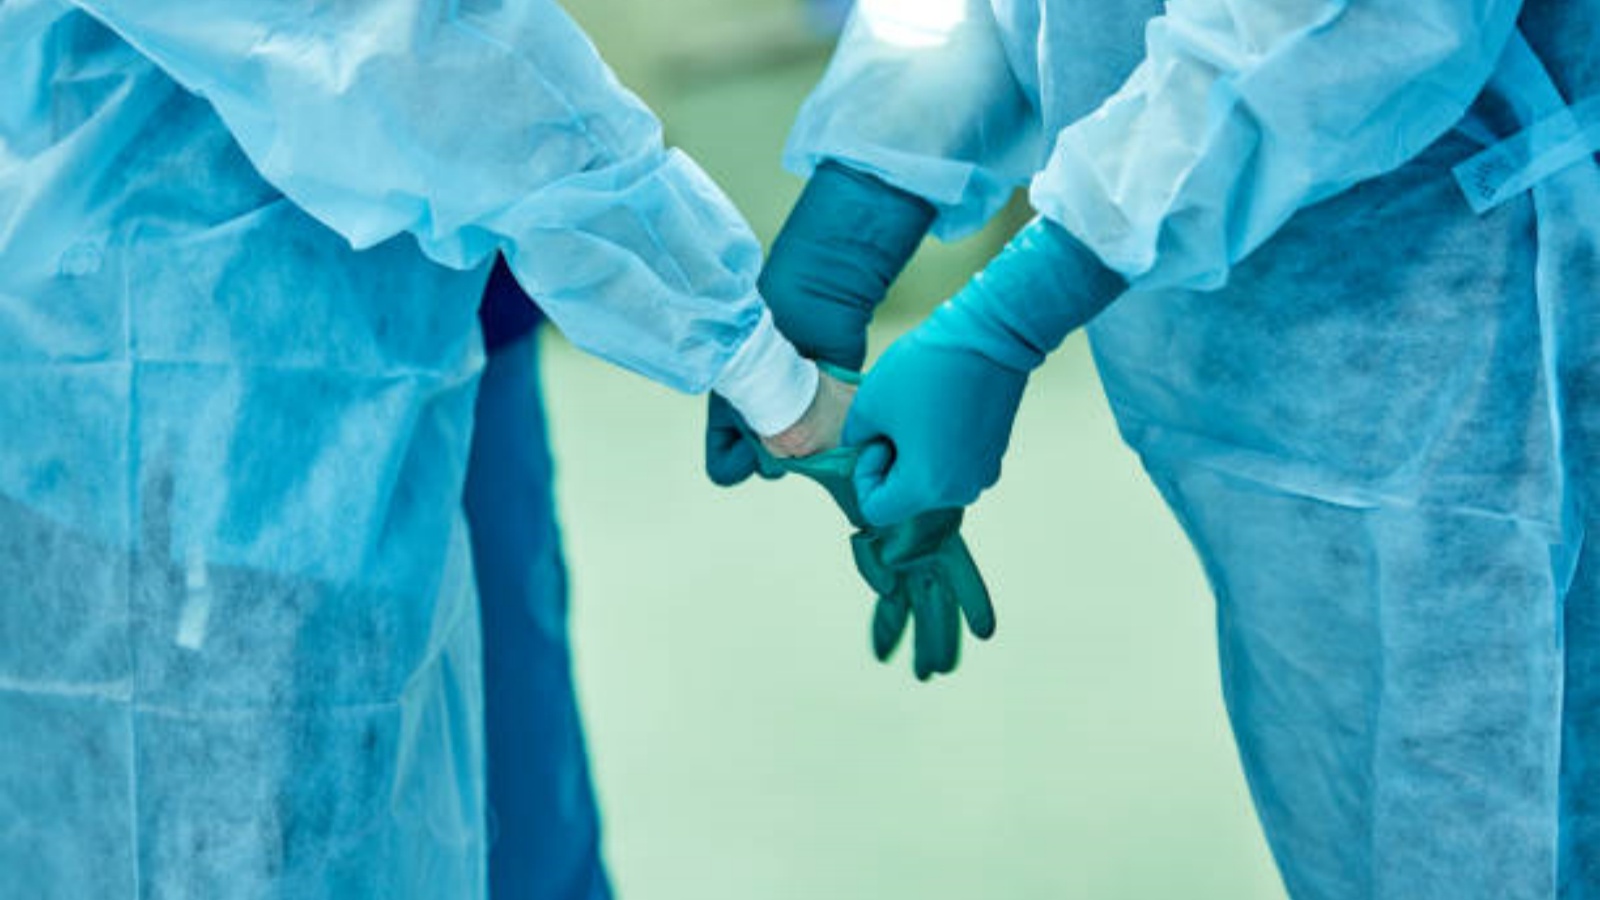 Disposable Breathable Surgical Gowns: Ensuring Safety and Comfort in the Operating Room